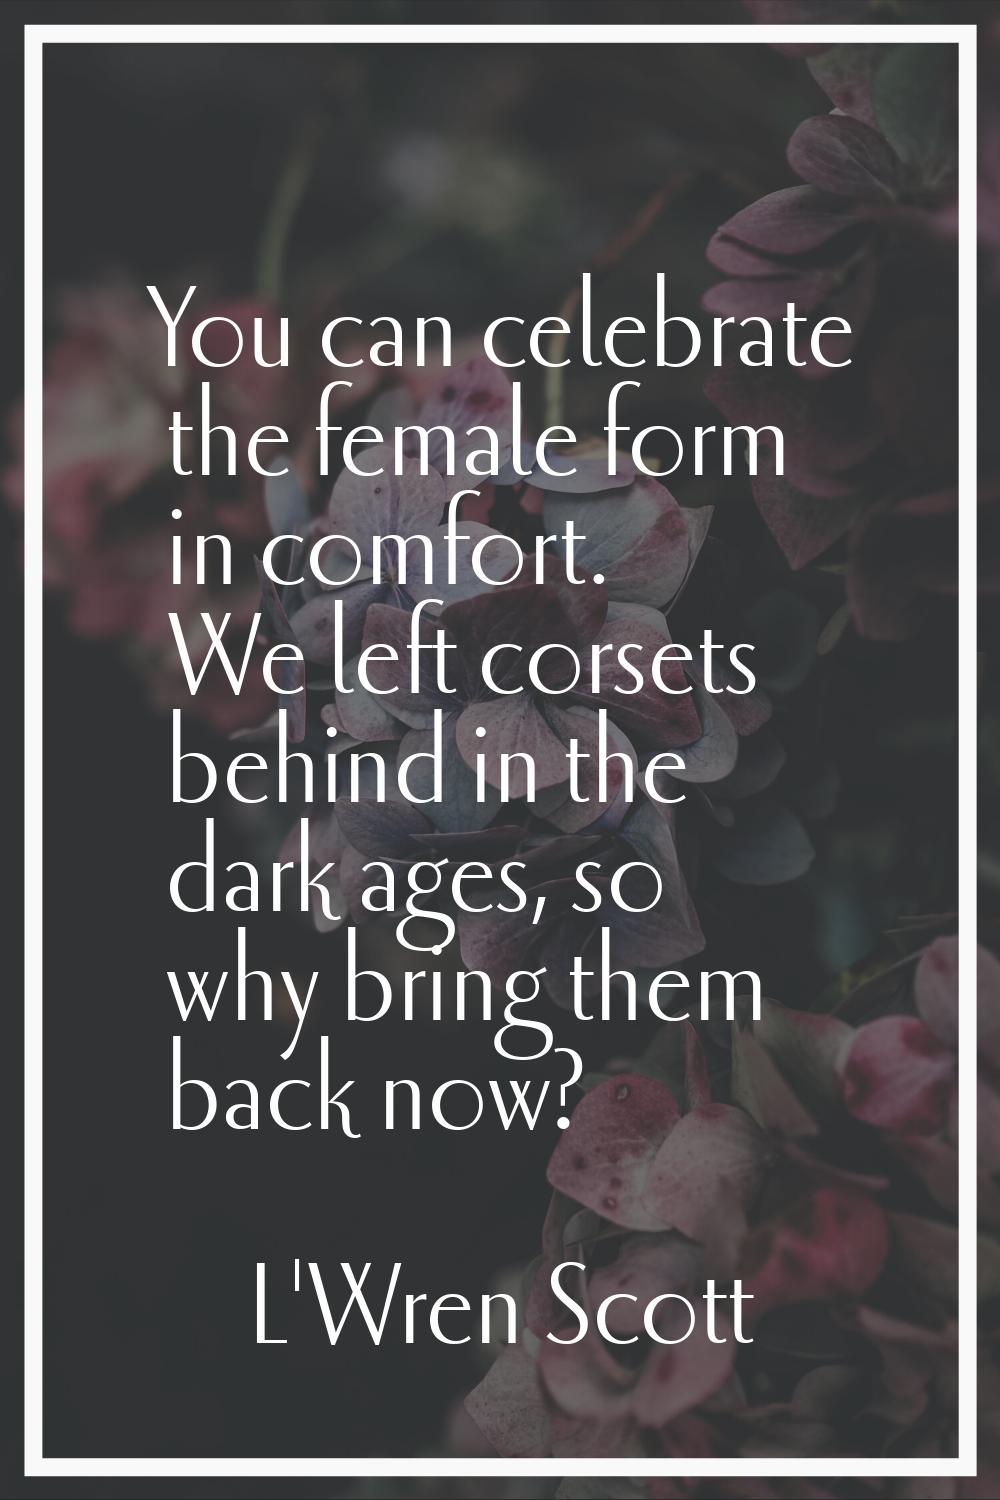 You can celebrate the female form in comfort. We left corsets behind in the dark ages, so why bring